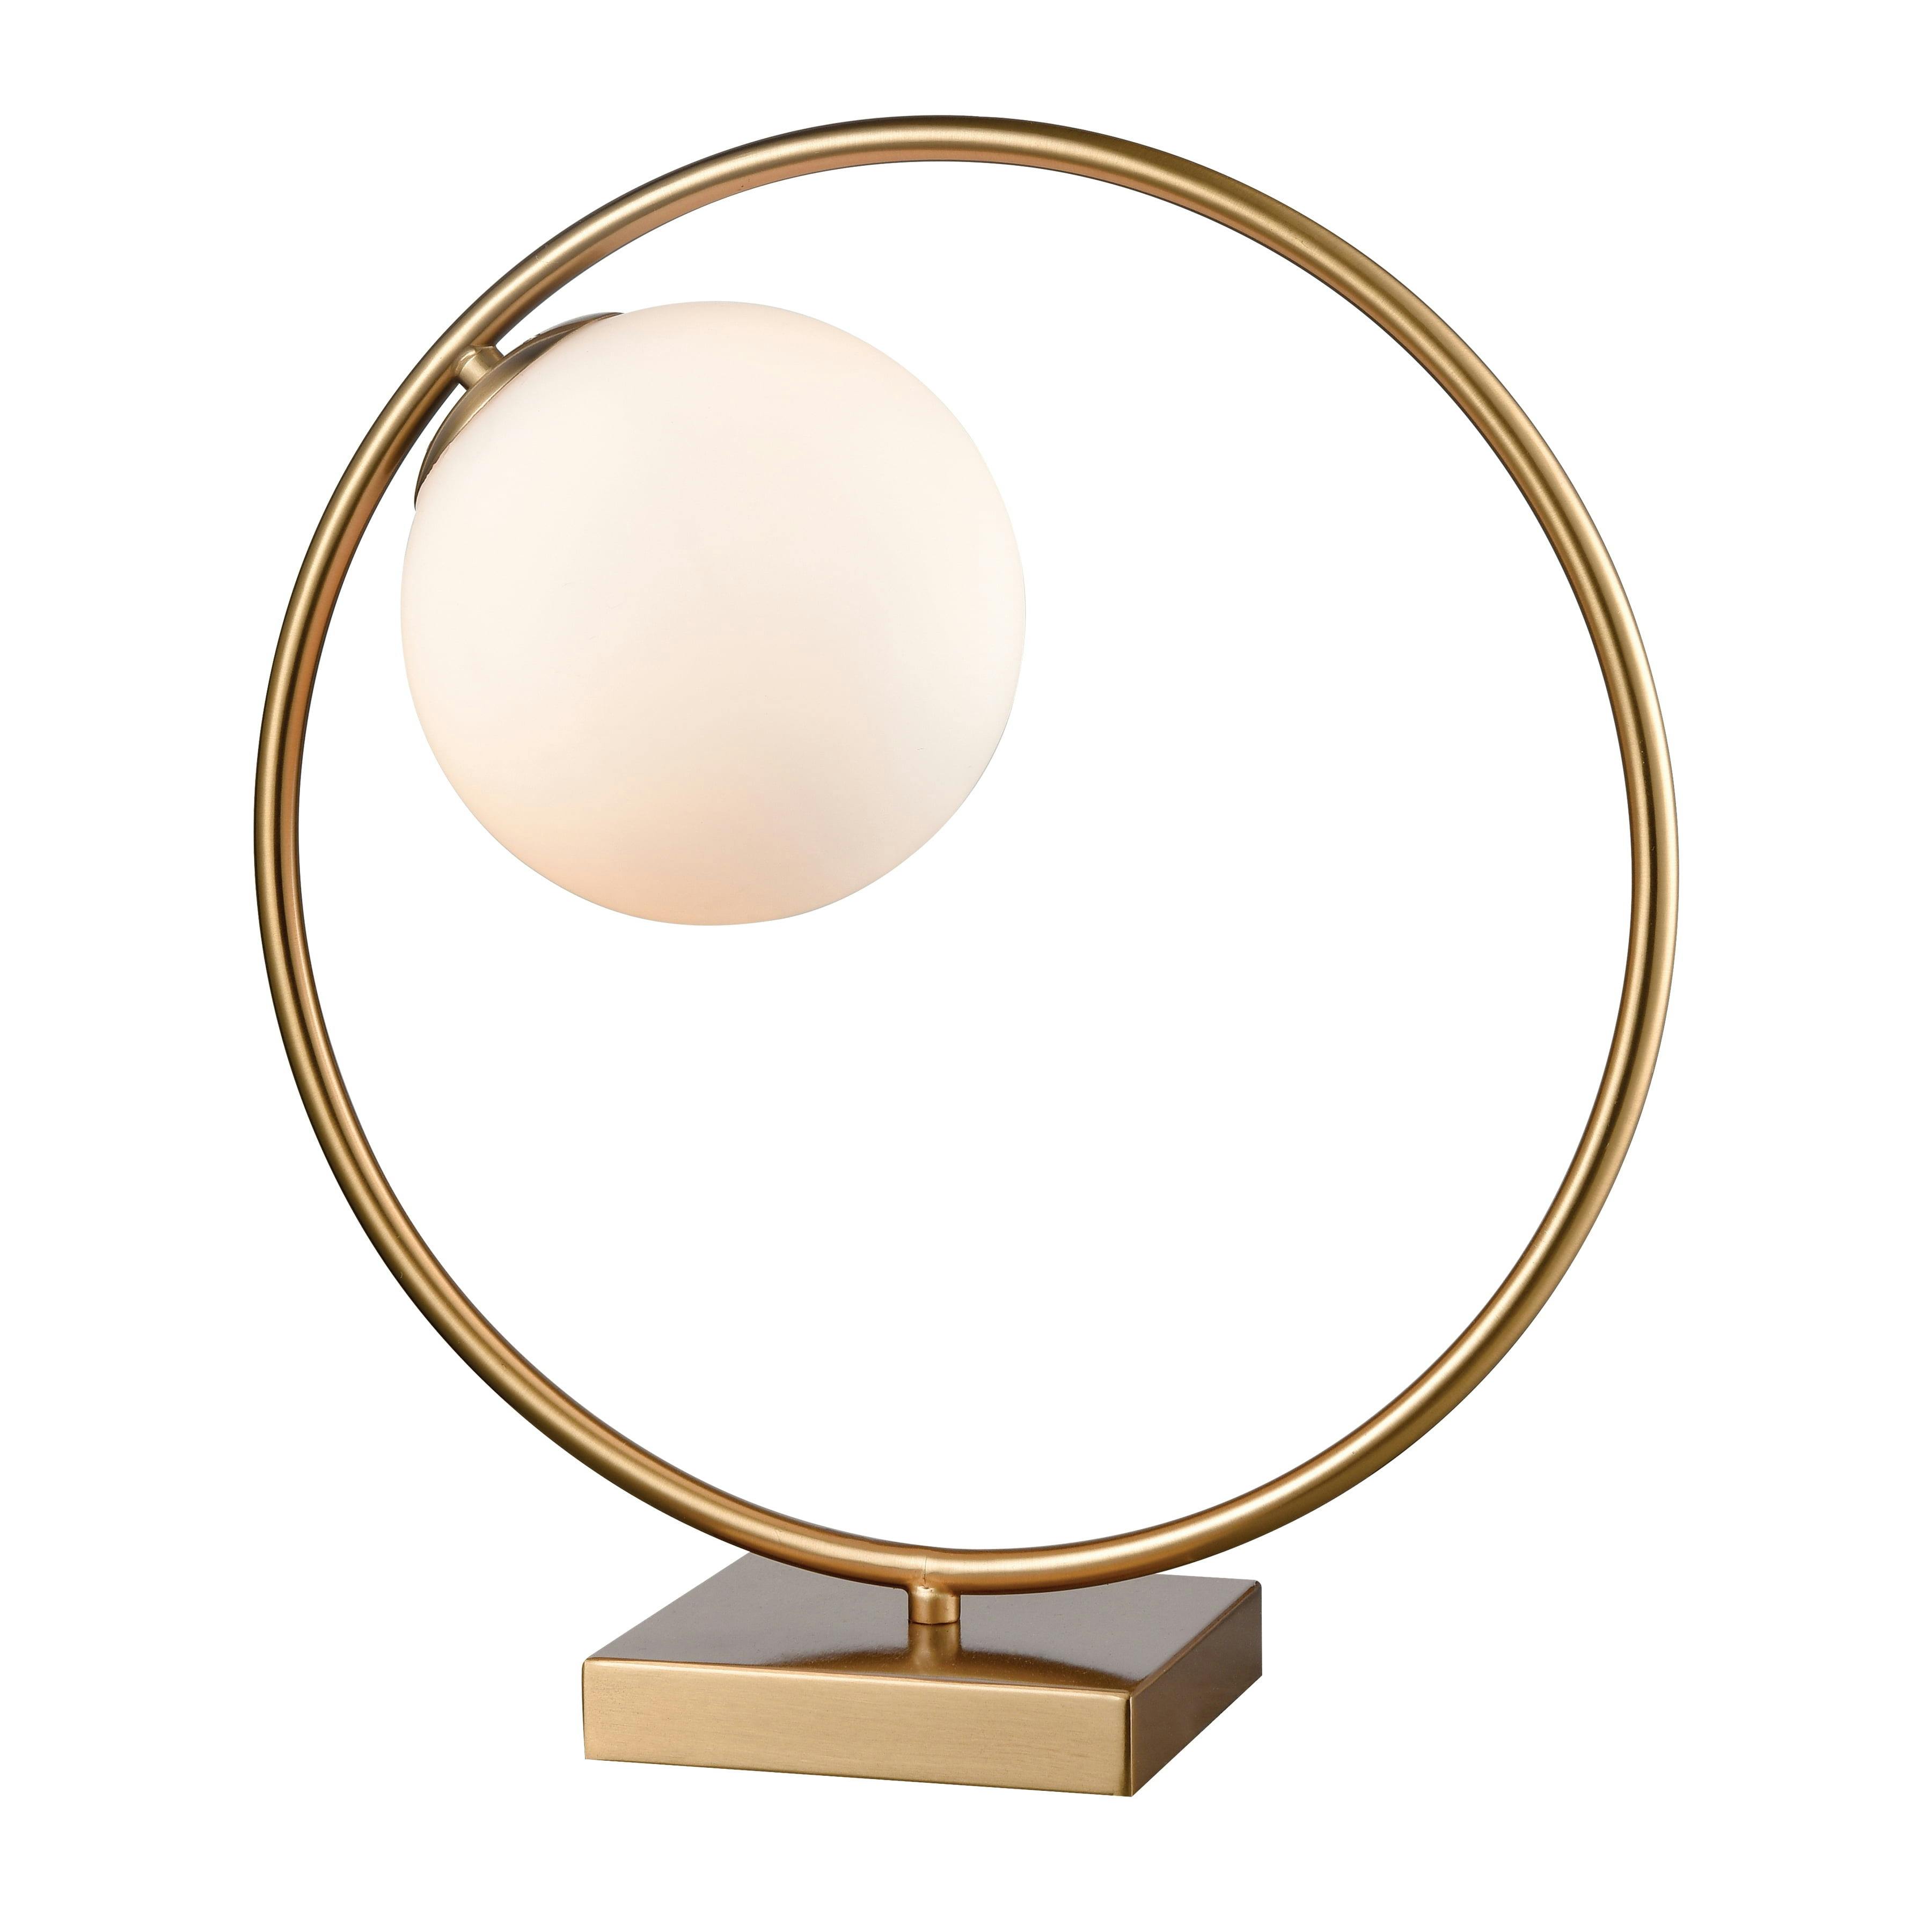 Adjustable White Glass Desk Lamp with Aged Brass Finish